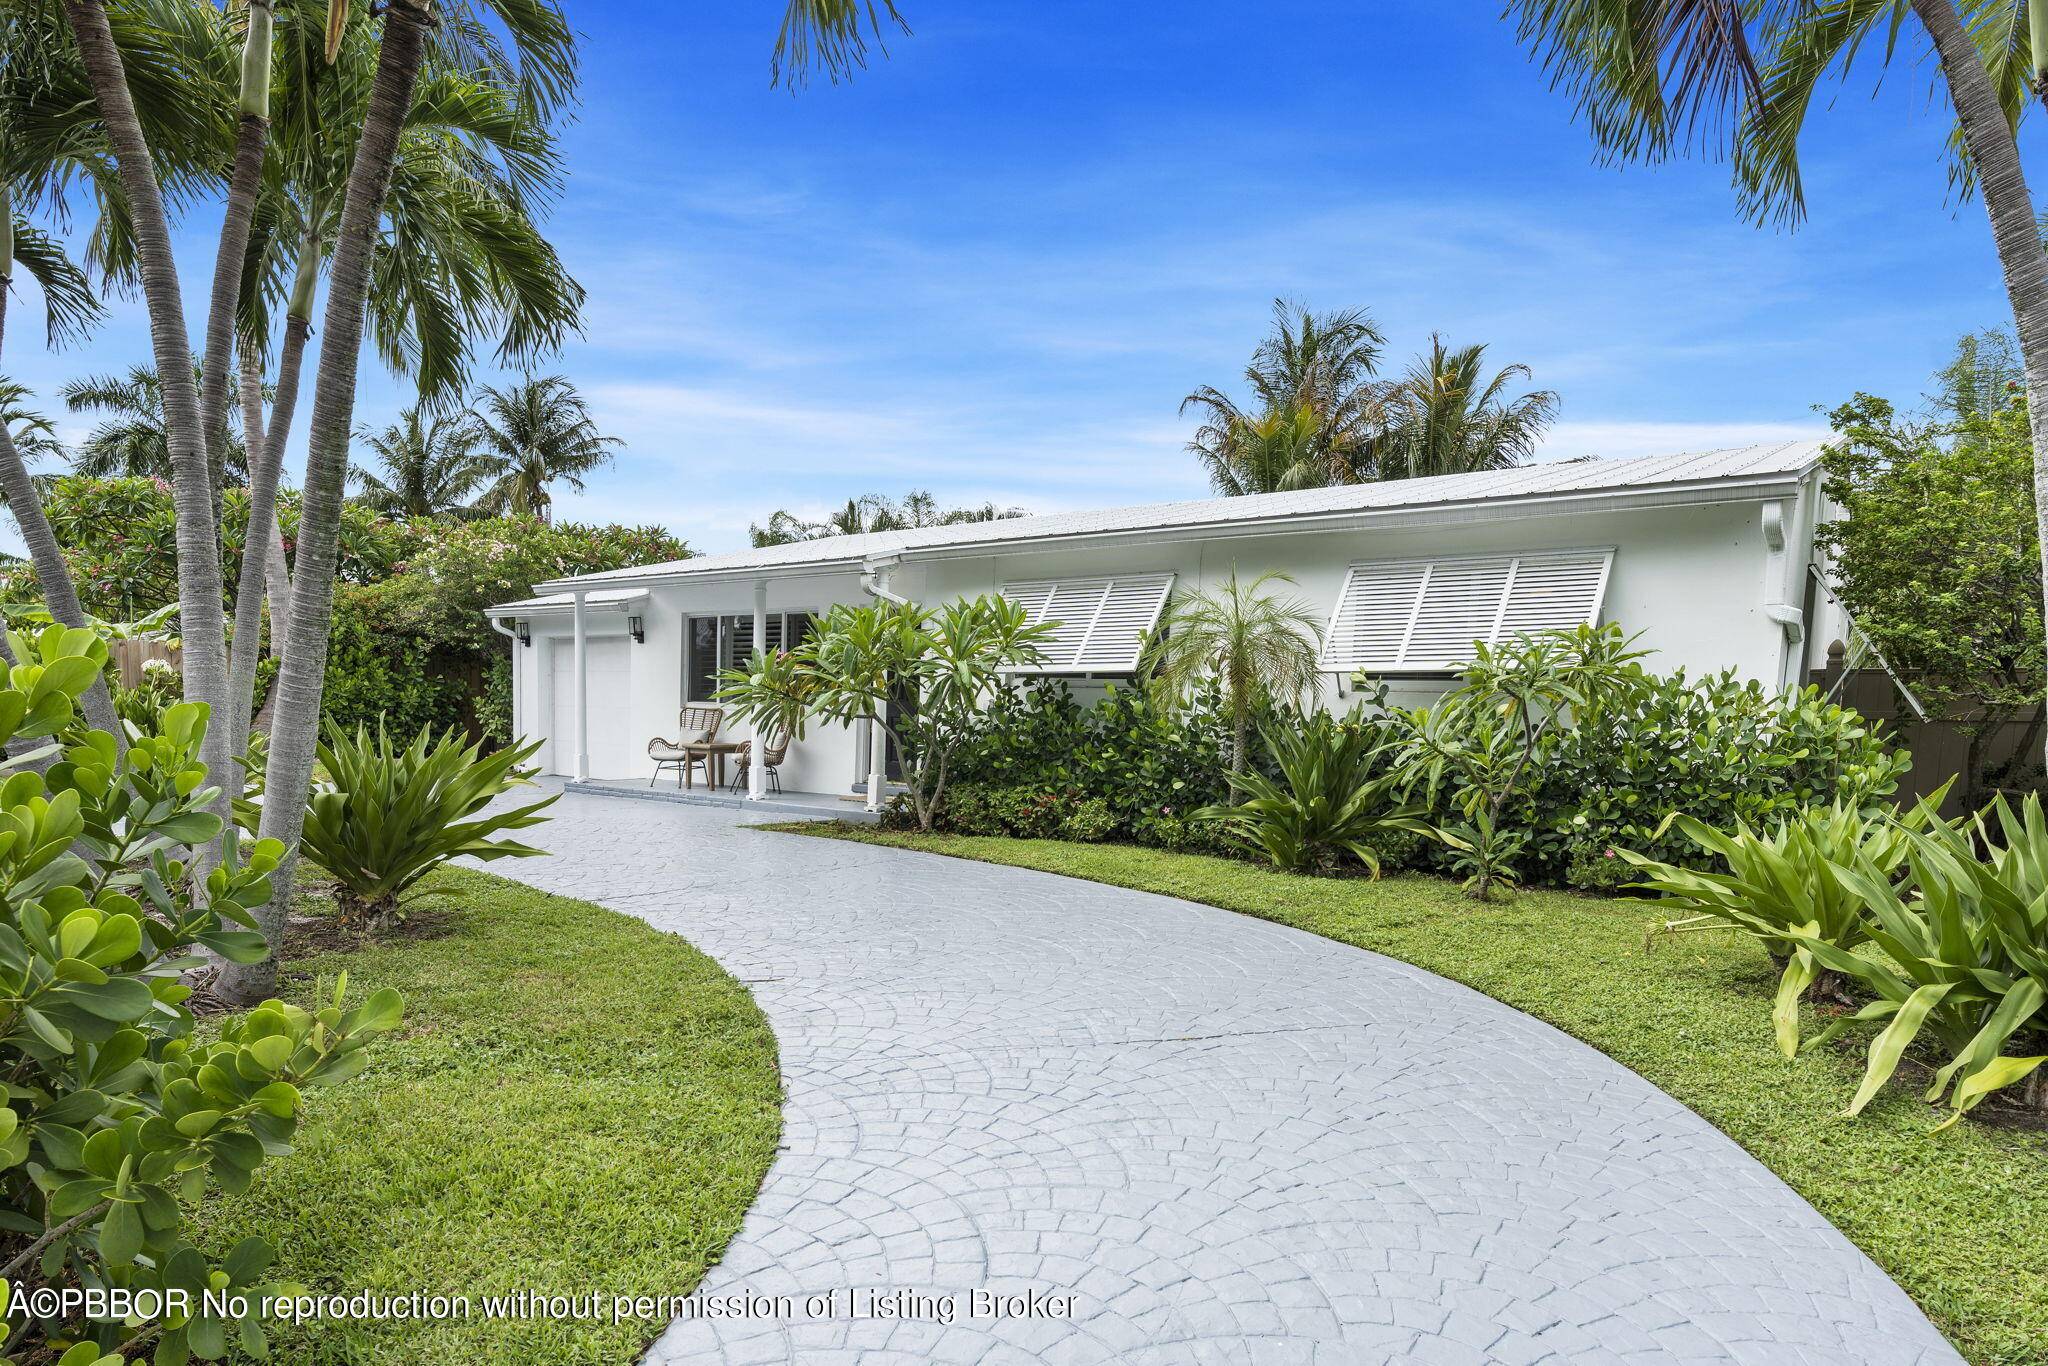 This 3 2 charmer is located in the trendy South End or ''SoSo'' neighborhood and offers close proximity the Intracoastal and Flagler Drive, Palm Beach island, and many fabulous shops ...